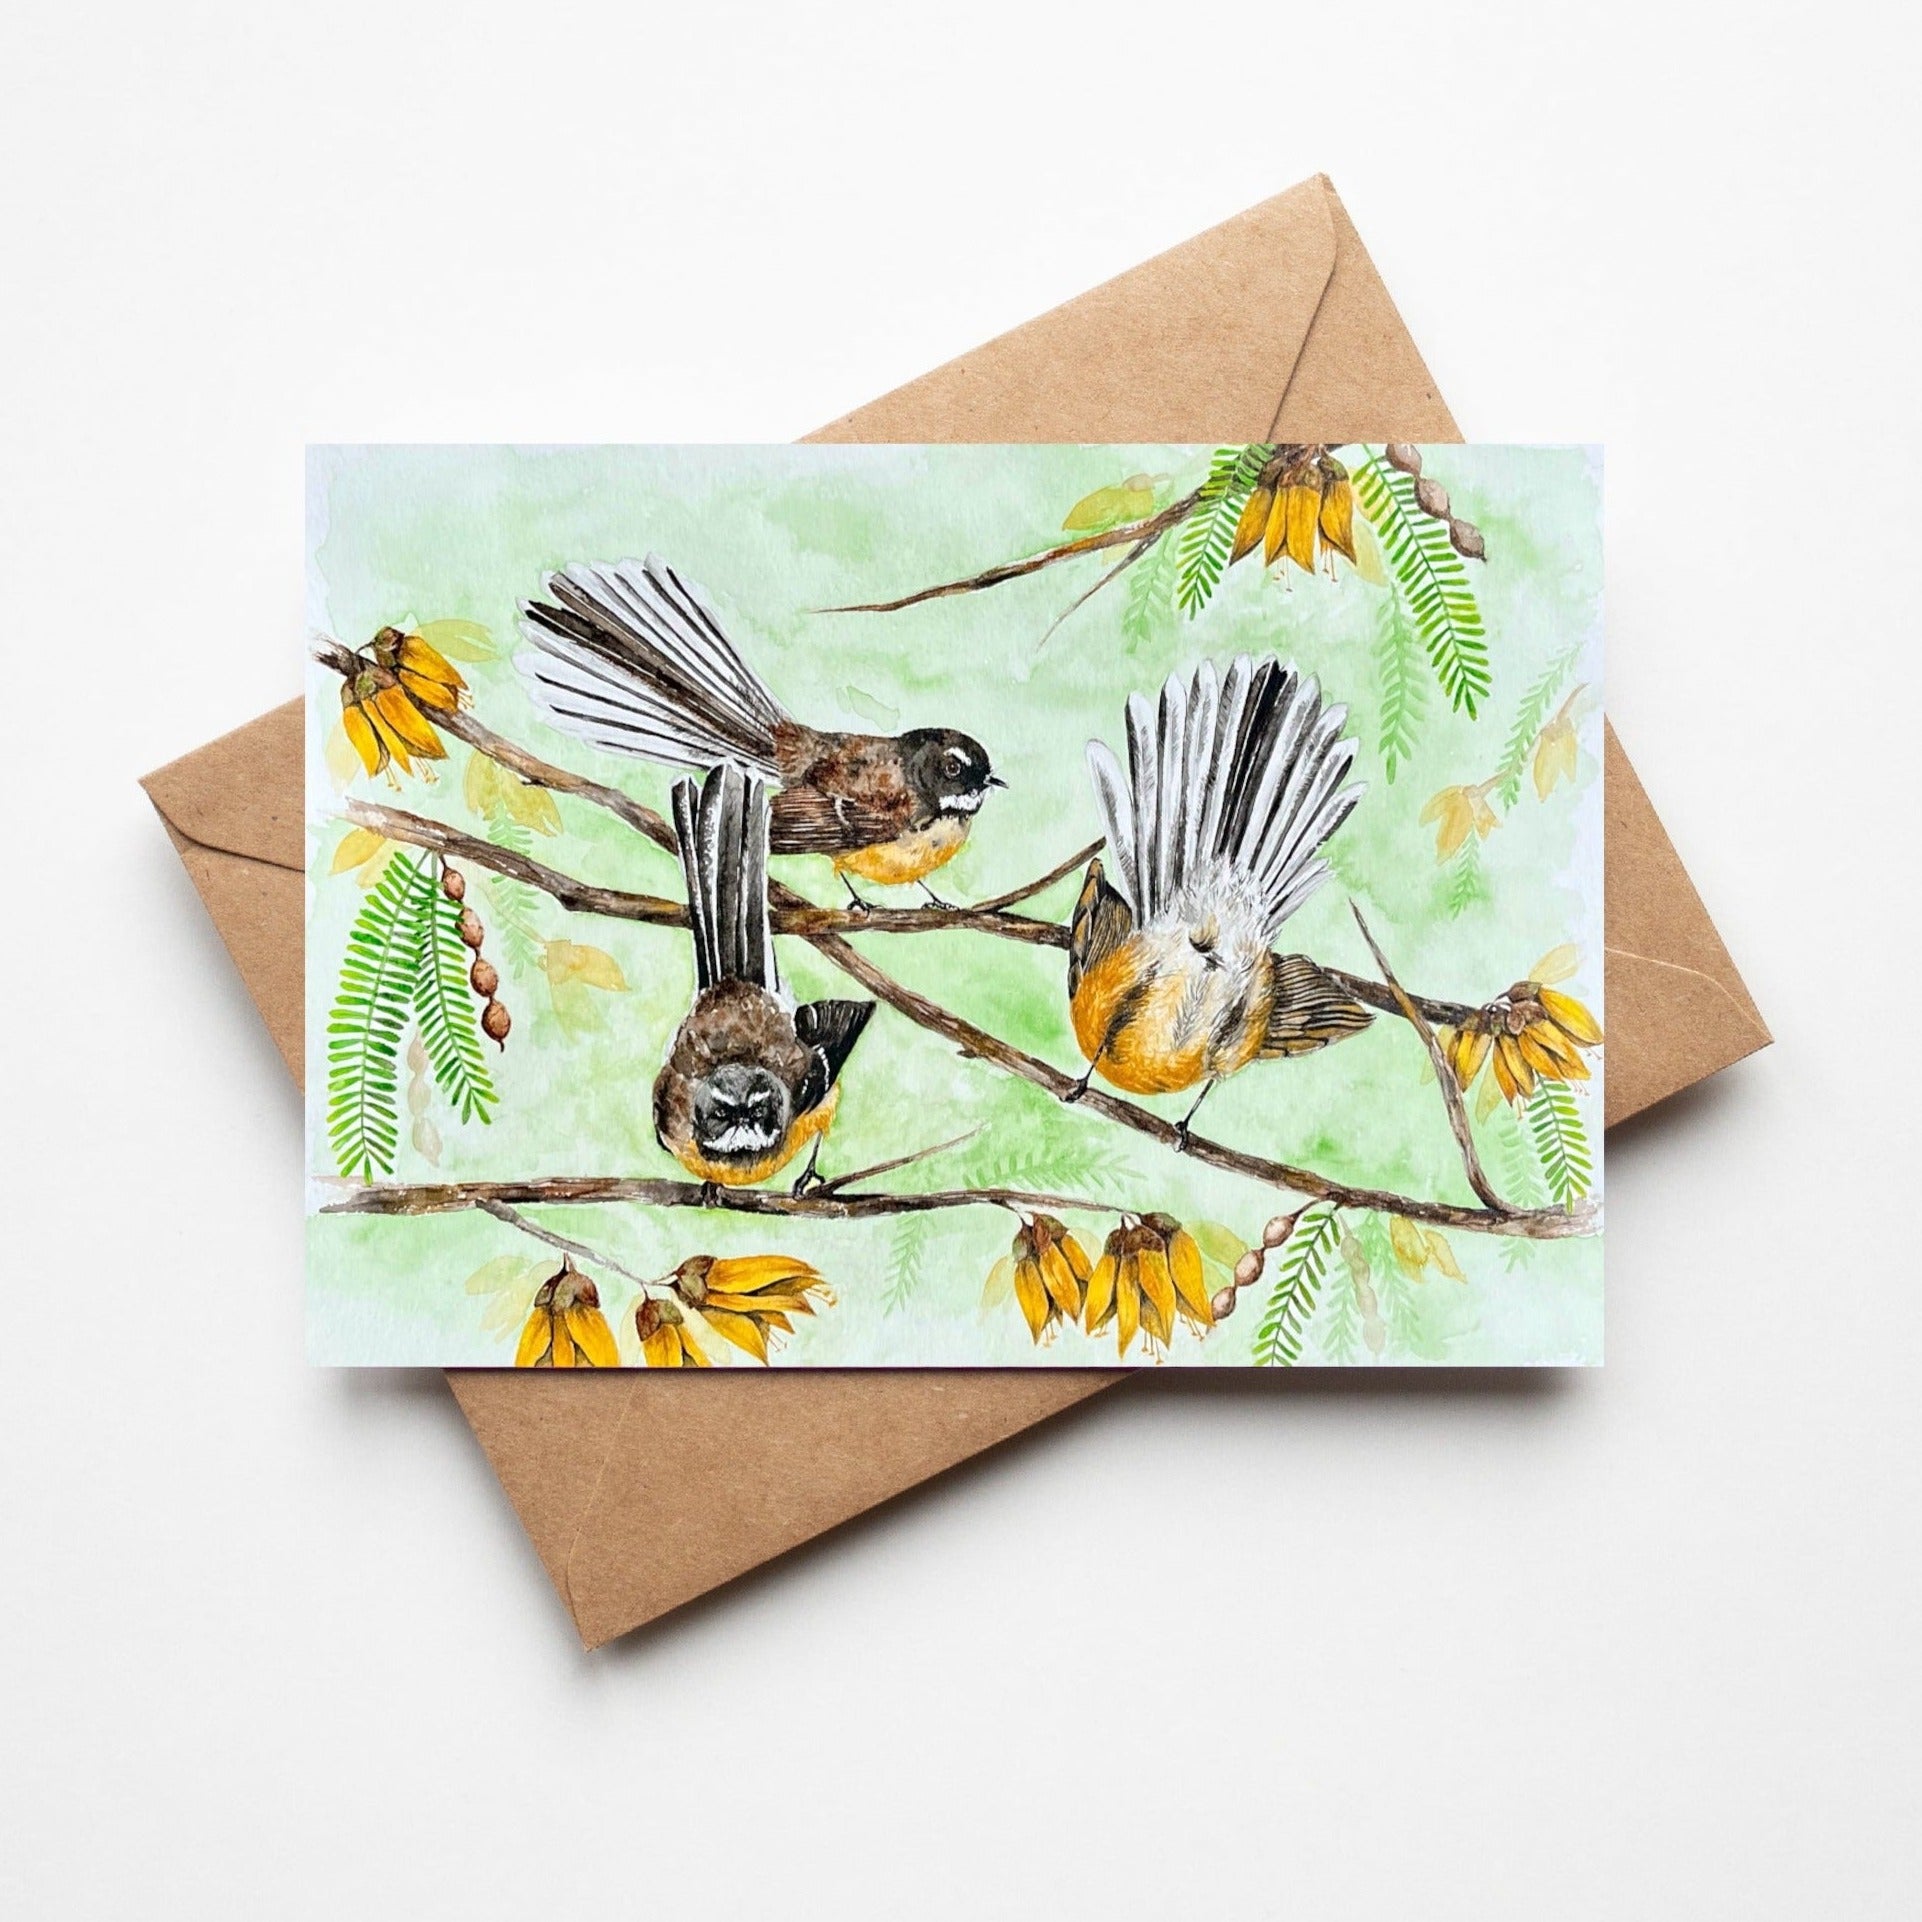 Greeting card by artist Leah Ingram featuring Fantails birds amongst Kowhai flowers.